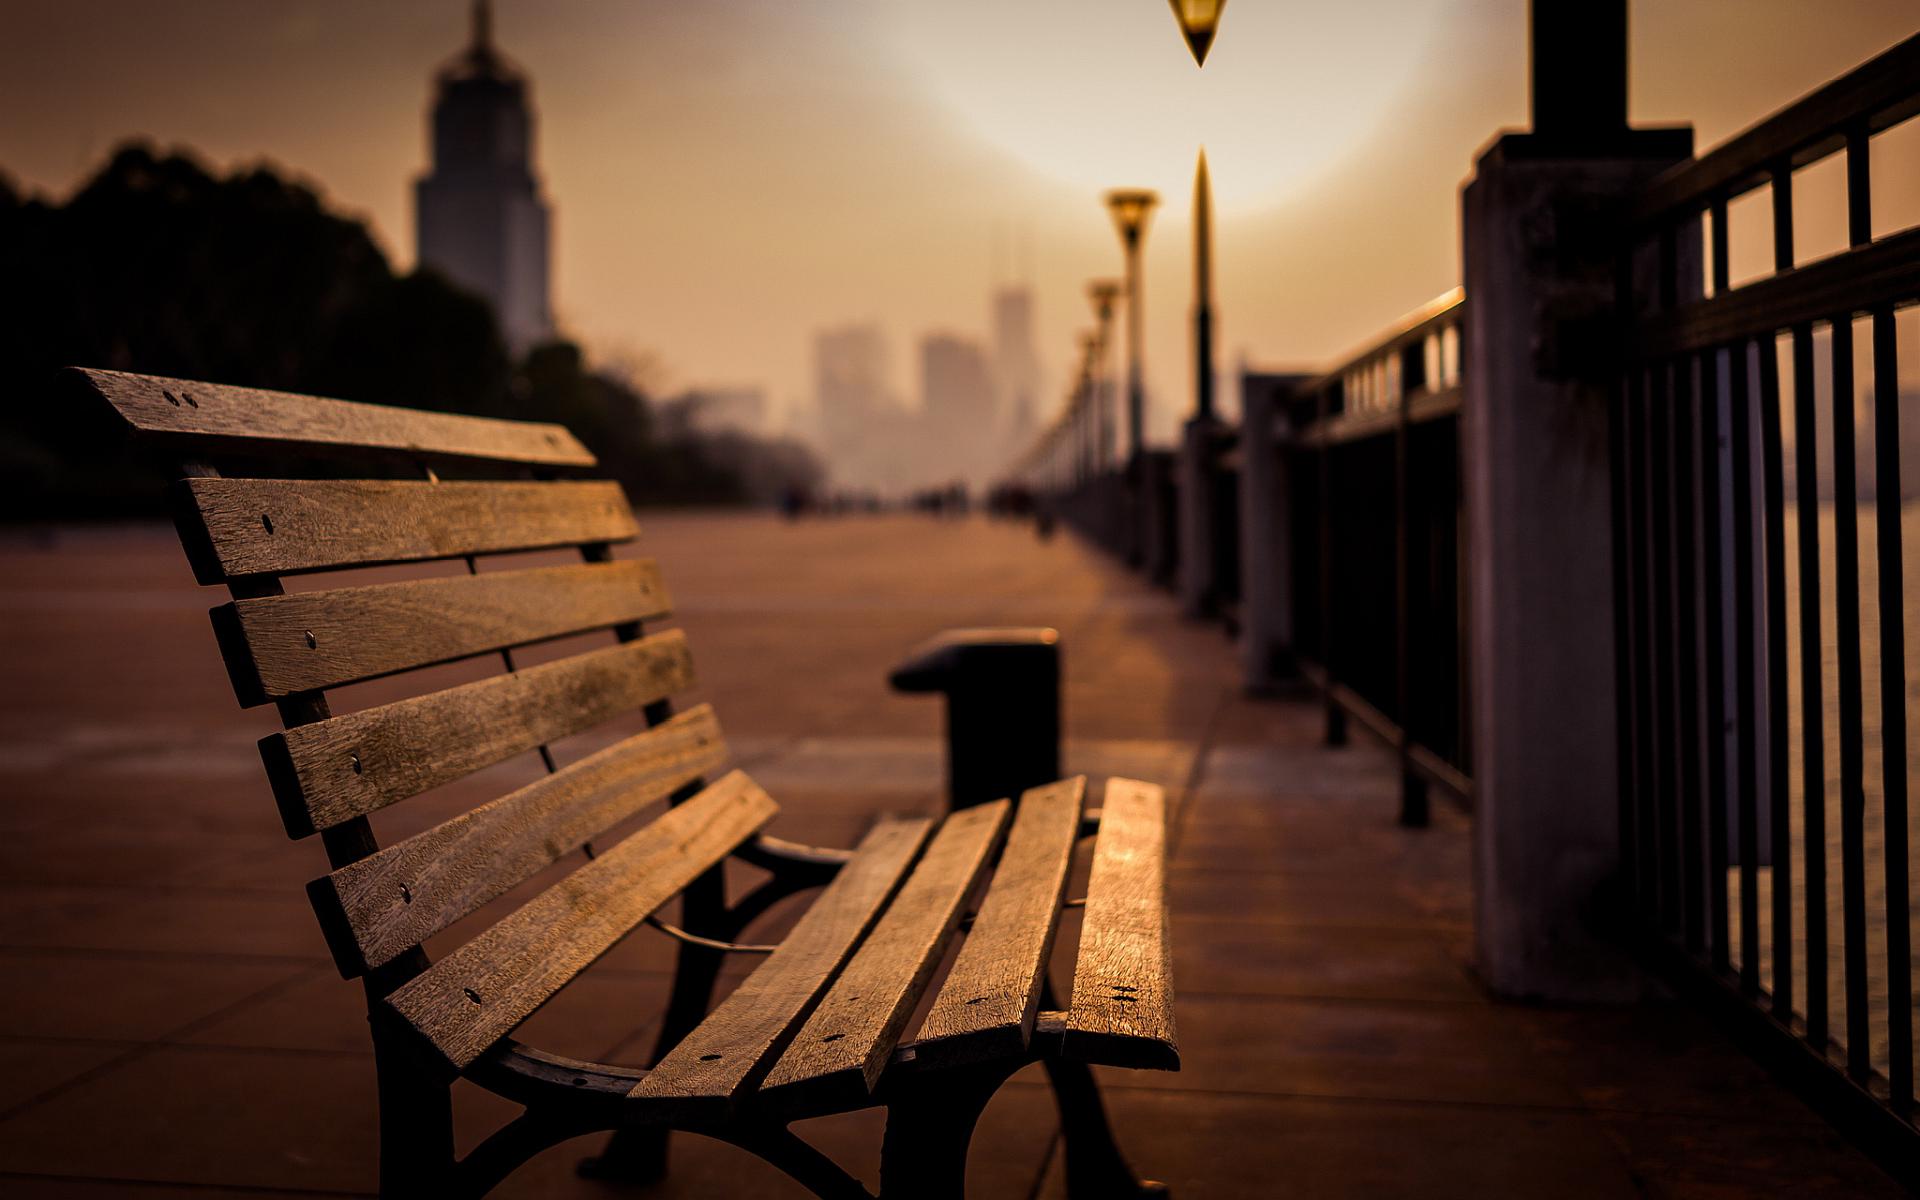 Hd Park Bench City Mood Wallpaper - Today Is My Birthday But I Am Alone -  1920x1200 Wallpaper 